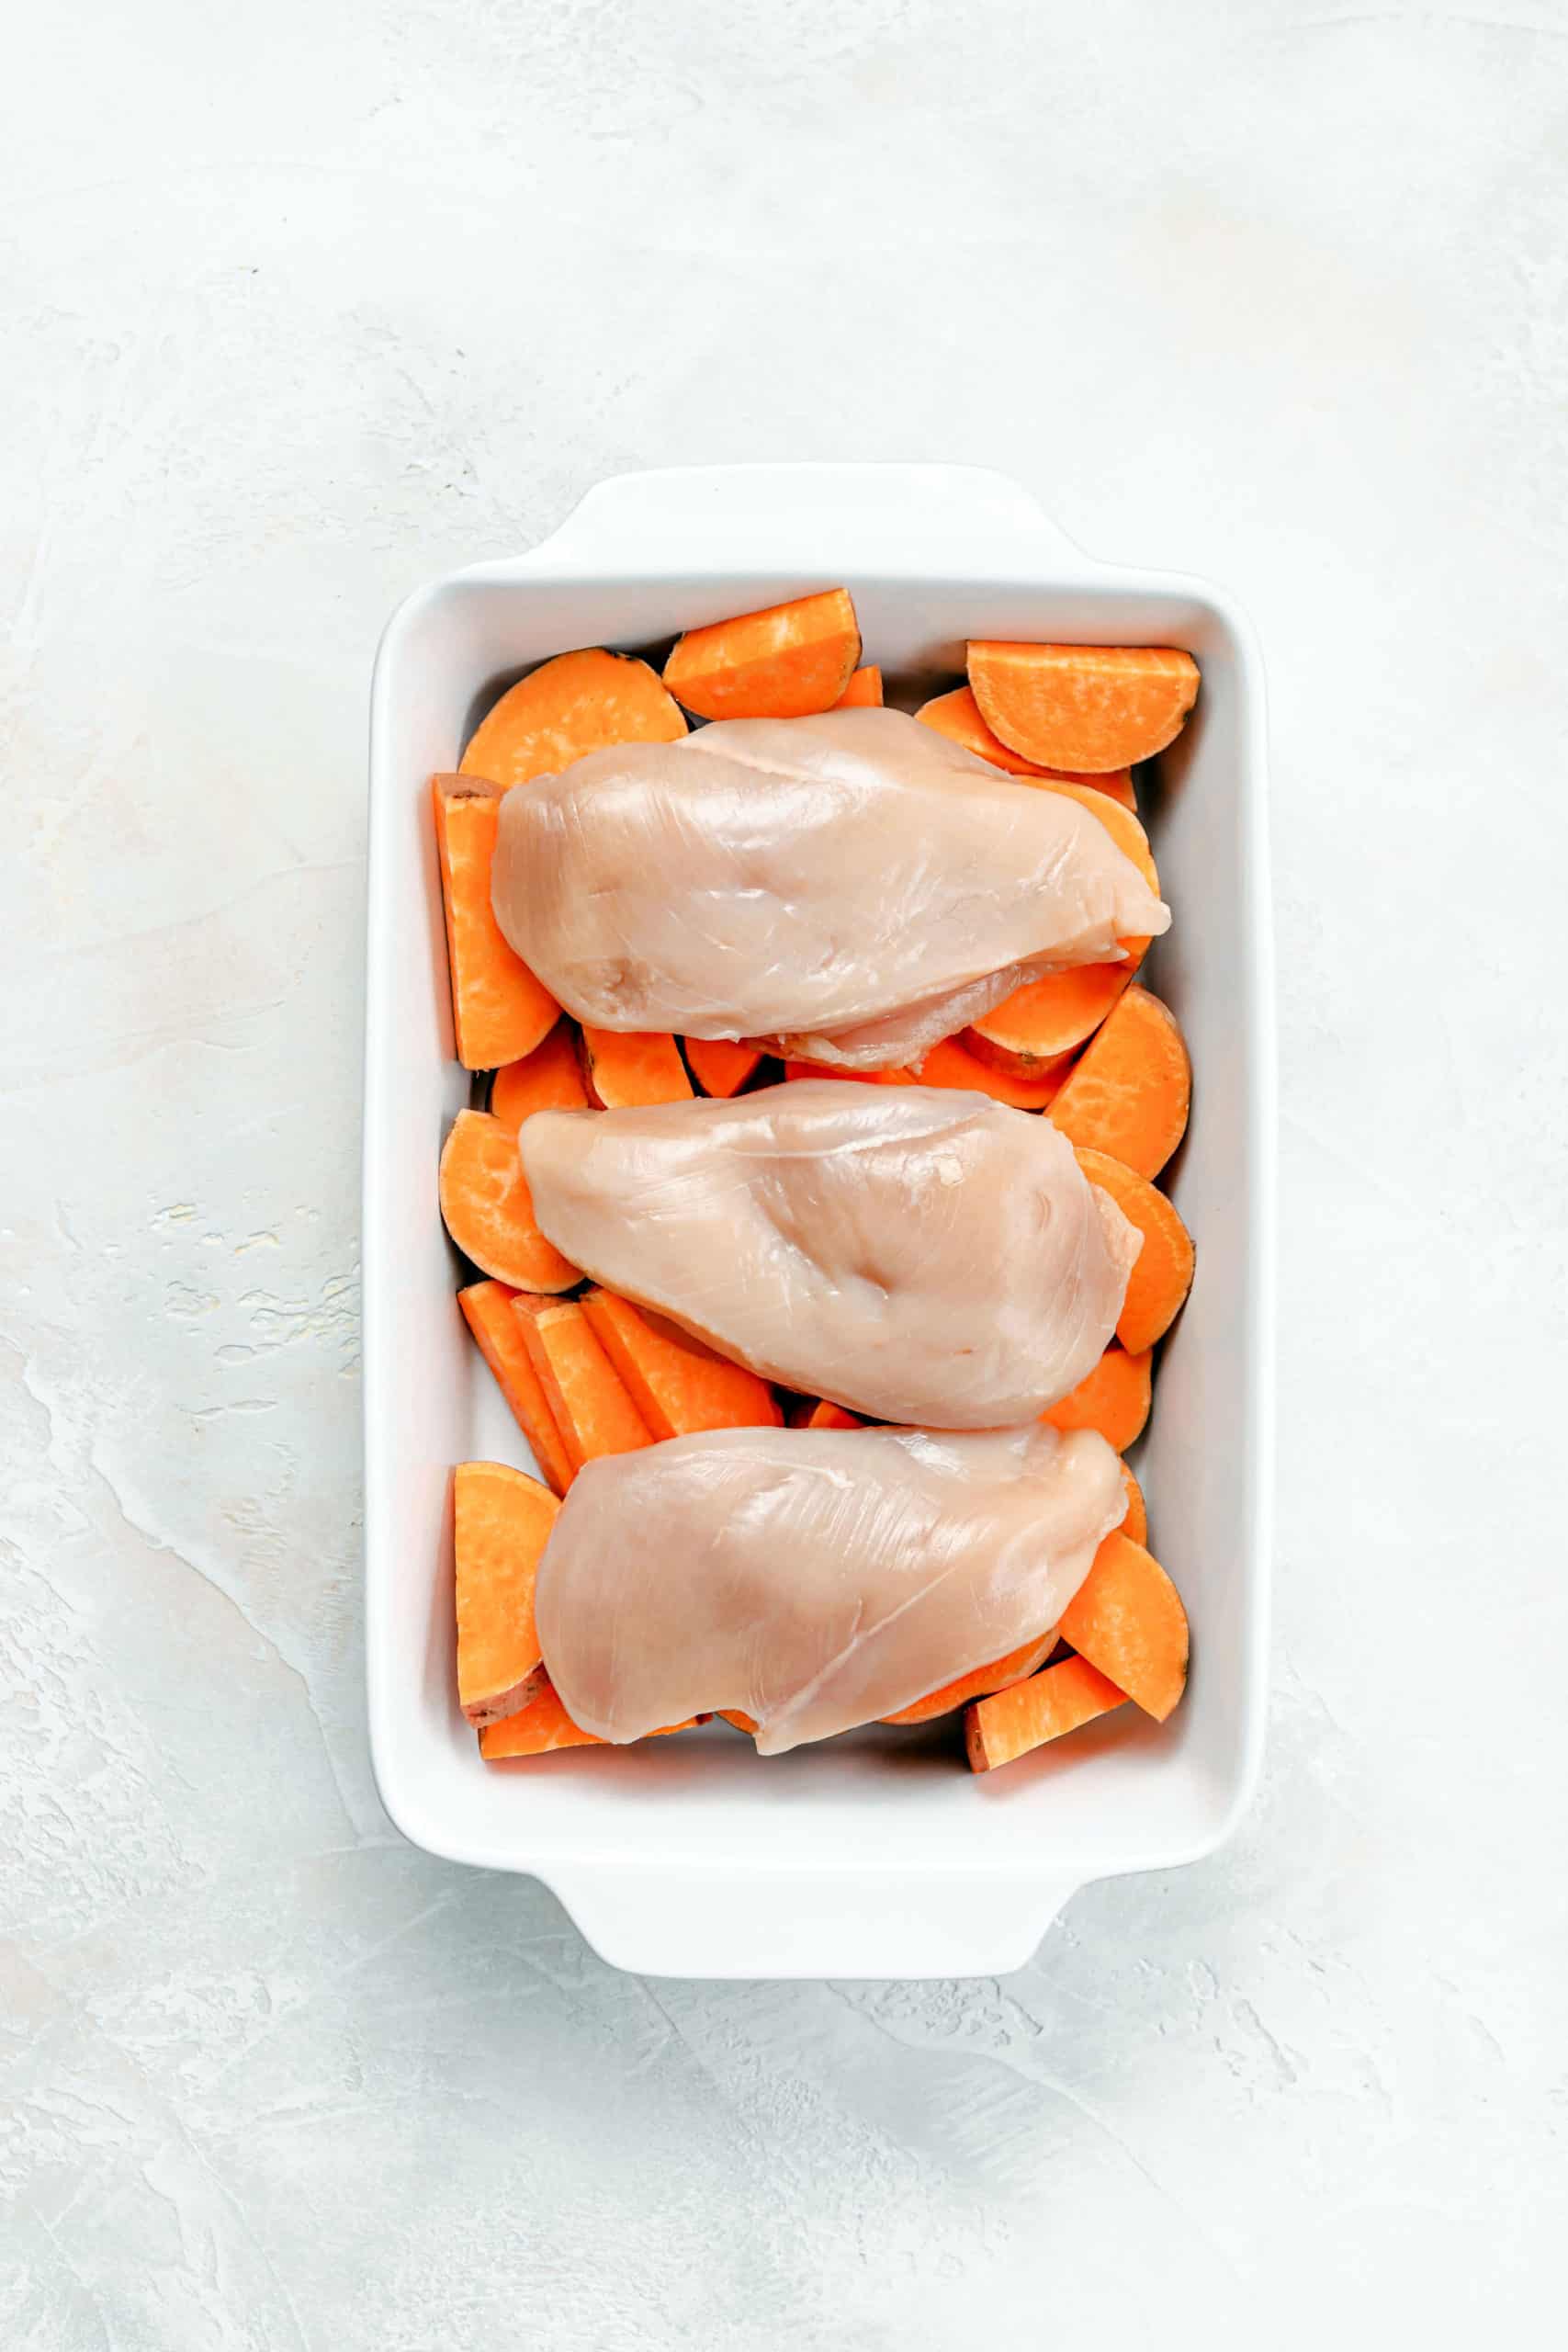 sweet potatoes and chicken in roasting pan